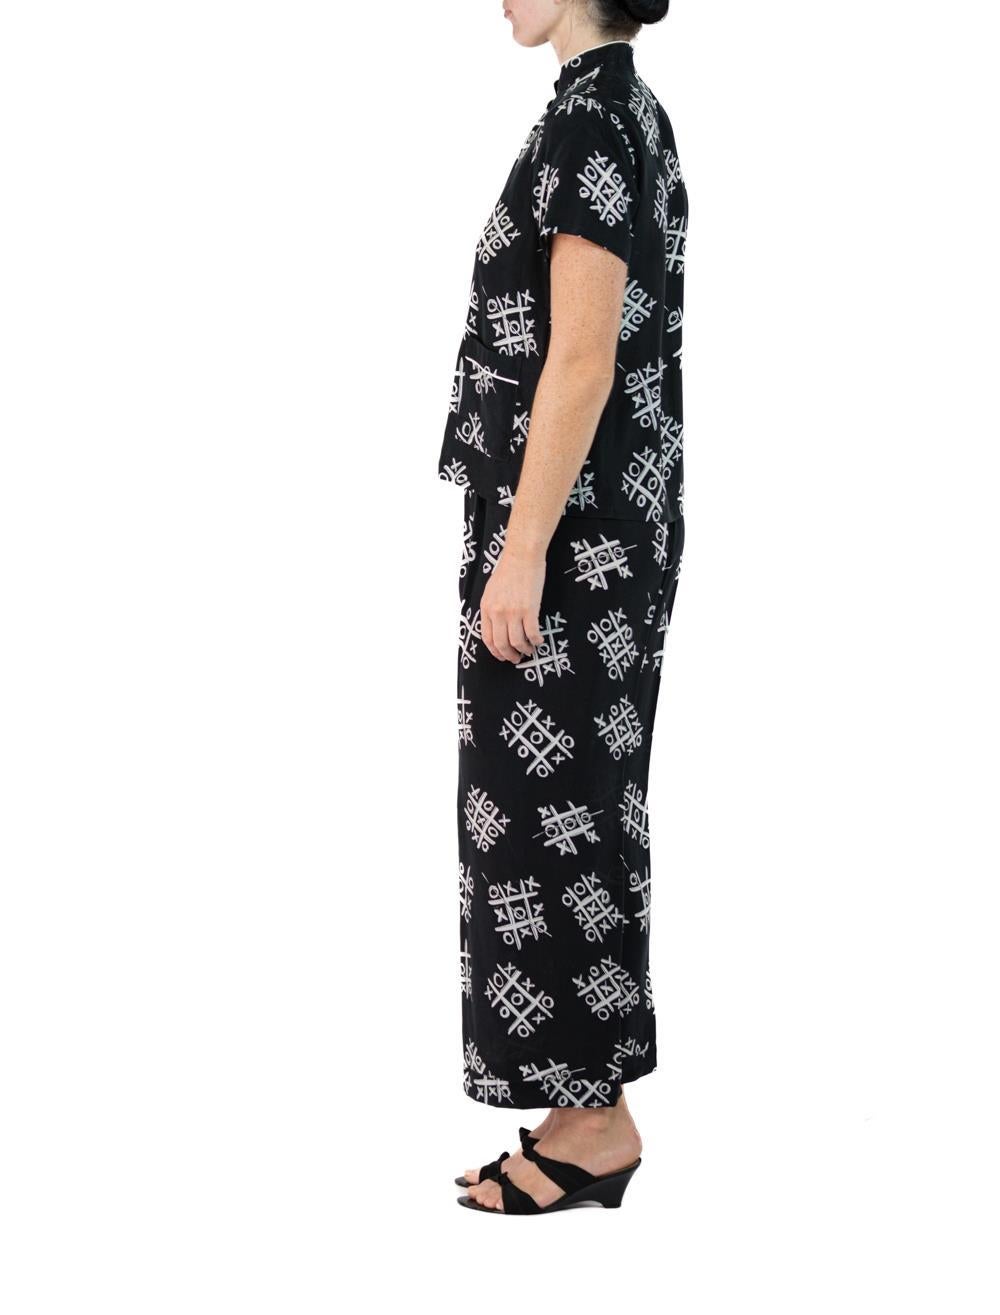 Women's Morphew Collection Black & White Tic Tac Toe Novelty Print Cold Rayon Bias Paja For Sale